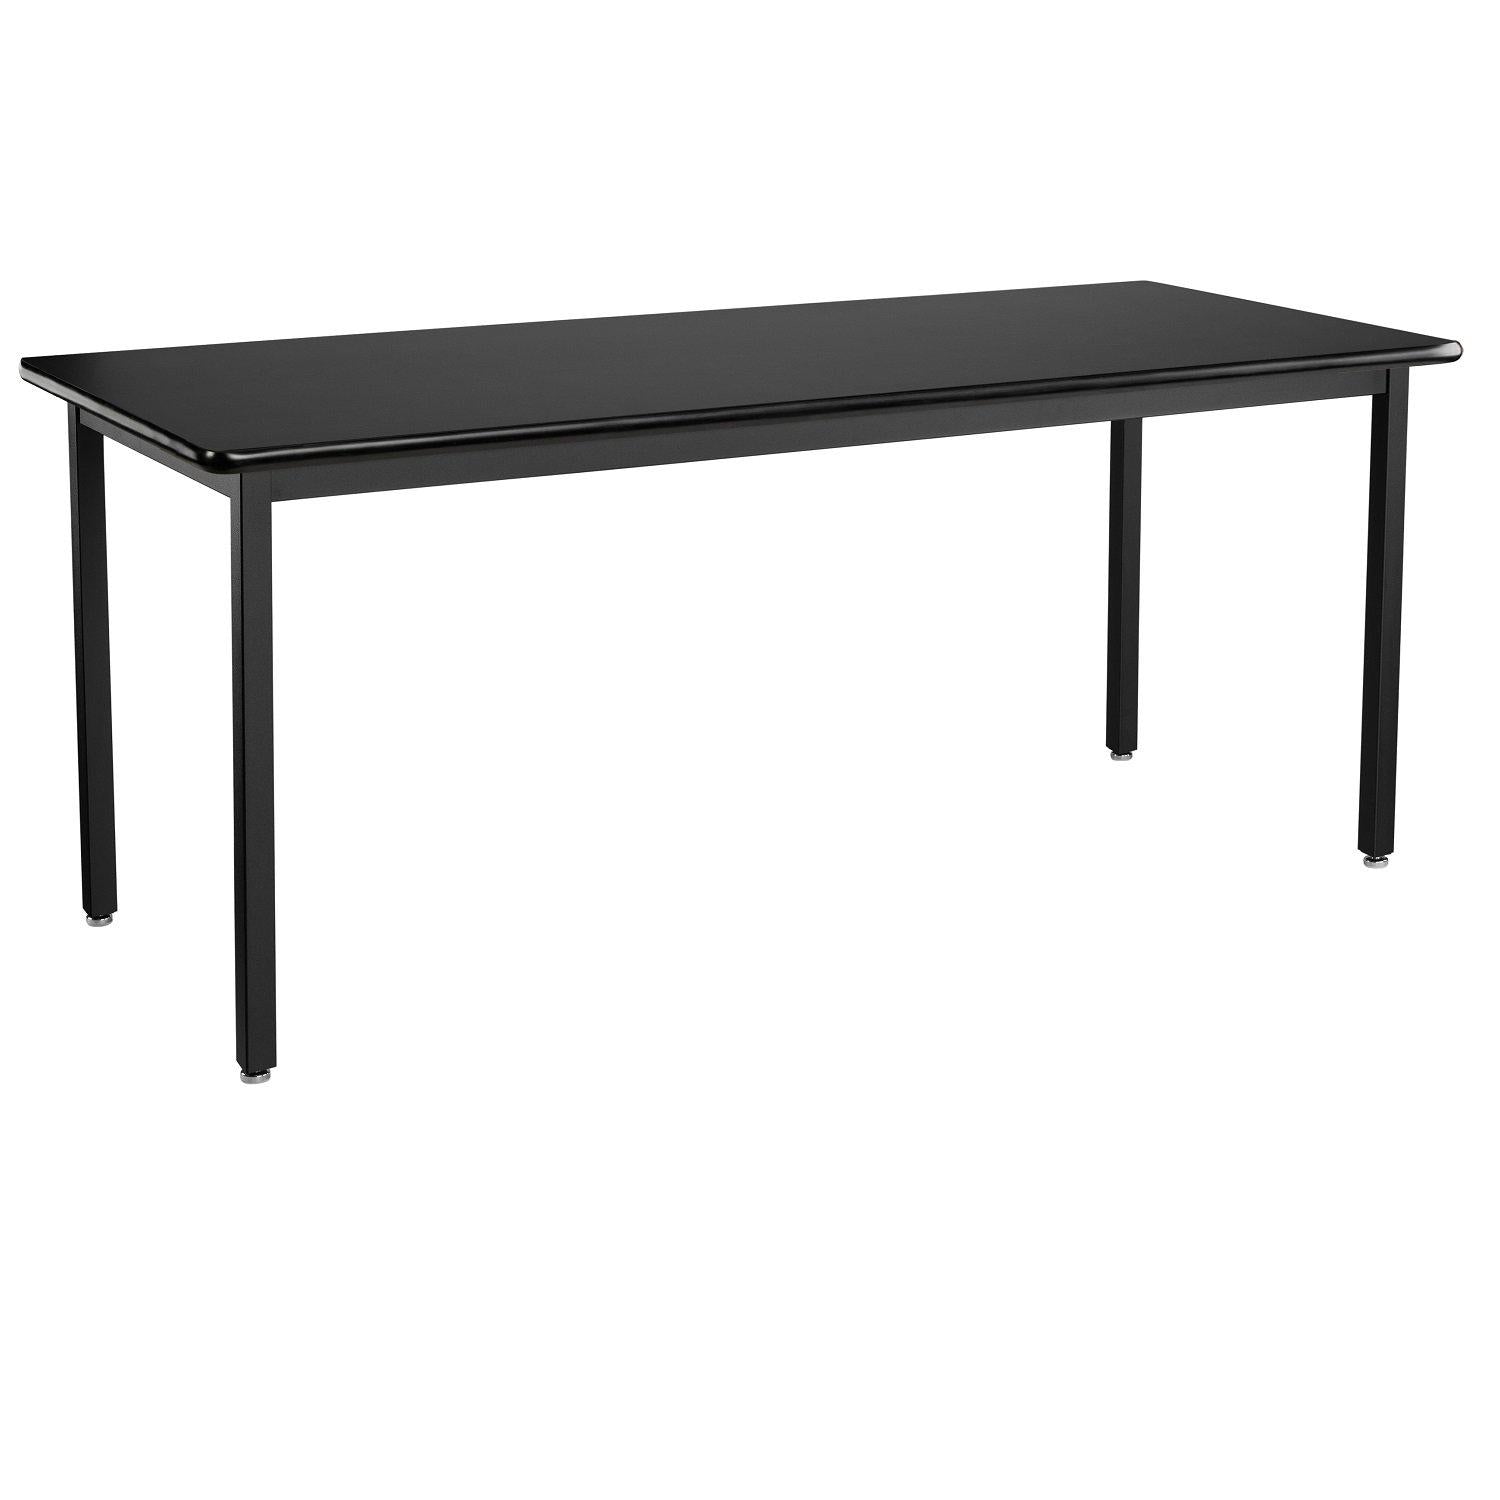 Heavy-Duty Fixed Height Utility Table, Black Frame, 24" x 84", High-Pressure Laminate Top with T-Mold Edge